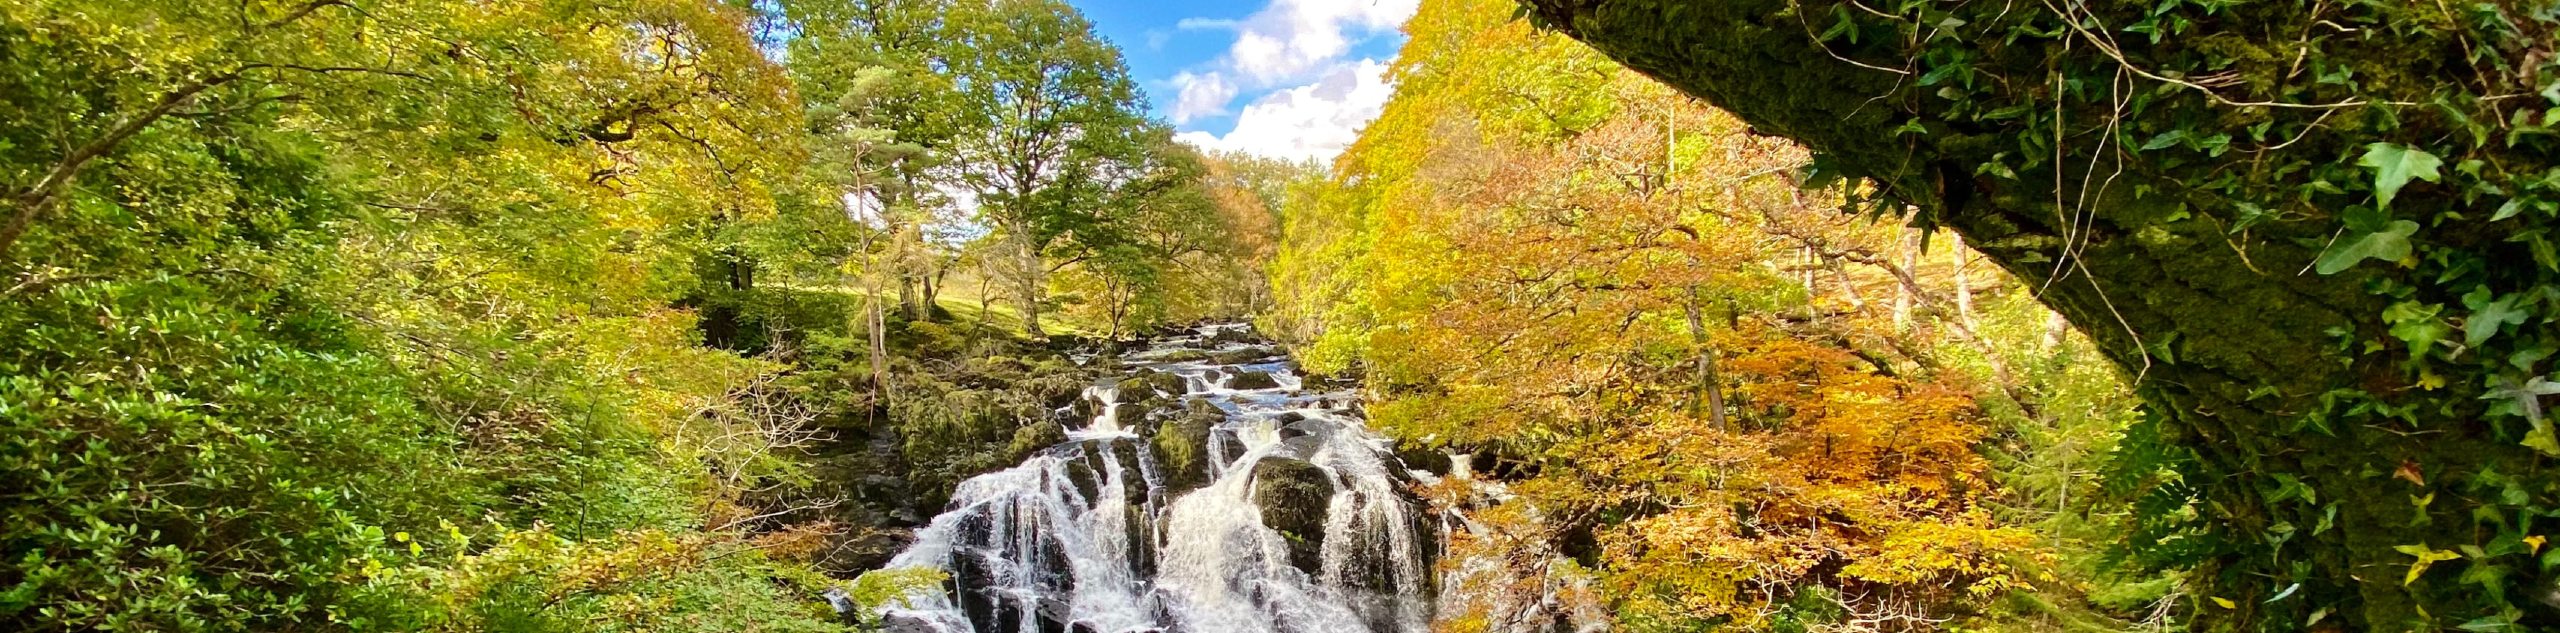 WATERFALL IN SNOWDONIA NATIONAL FOREST